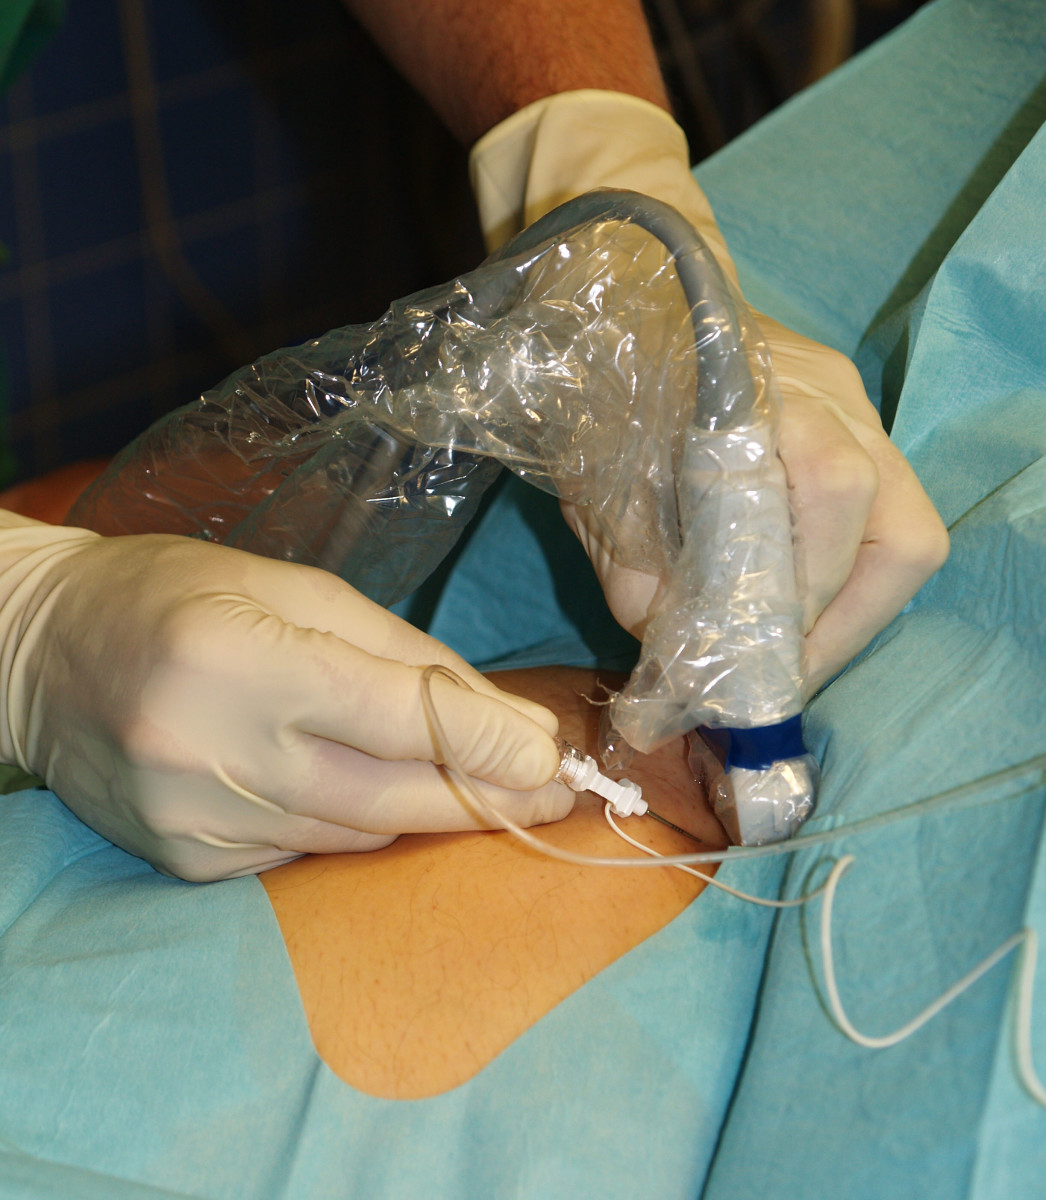 Femoral nerve block being placed with the use of an ultrasound probe to guide the needle toward, but also to protect, the nerve. Other techniques also provide safe and effective blocks.